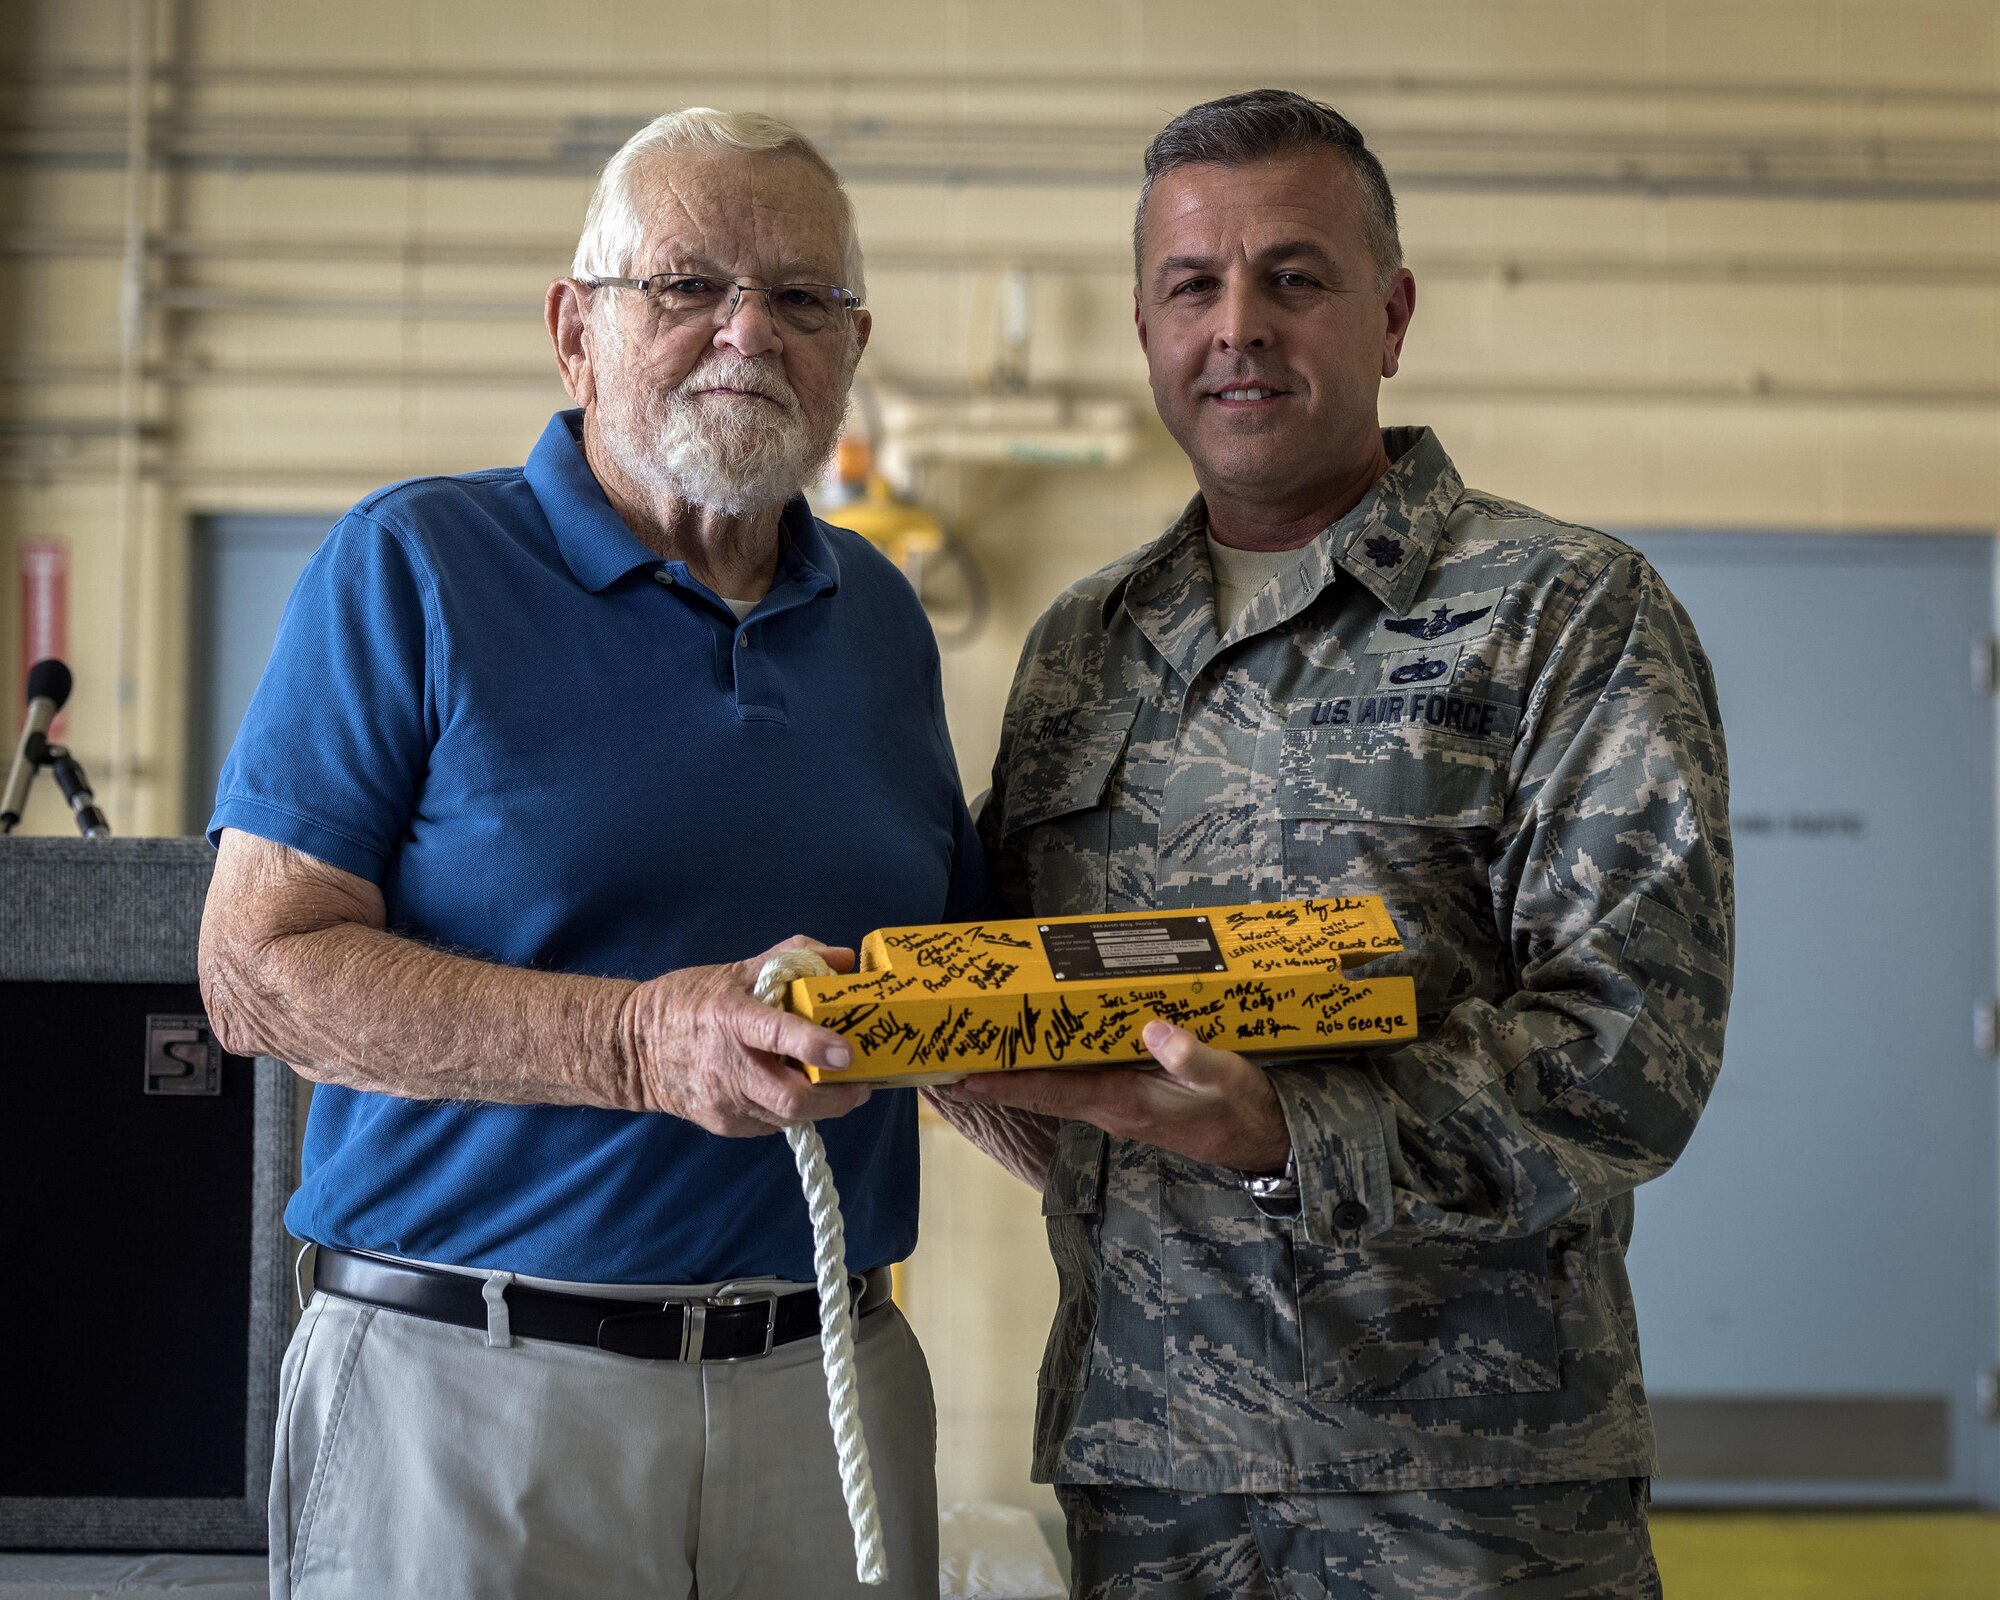 Retired U.S. Air Force Chief Master Sgt. Homer Wells, a former chief of maintenance with the 182nd Tactical Air Support Group, and Lt. Col. Steven Rice, the deputy commander of the 182nd Maintenance Group, pose for a photo during a ceremony honoring his service in Peoria, Ill., Aug. 24, 2017. Wells enlisted in 1947 and retired in 1984 with 37 years of service with the Illinois Air National Guard. (U.S. Air National Guard photo by Tech. Sgt. Lealan Buehrer)